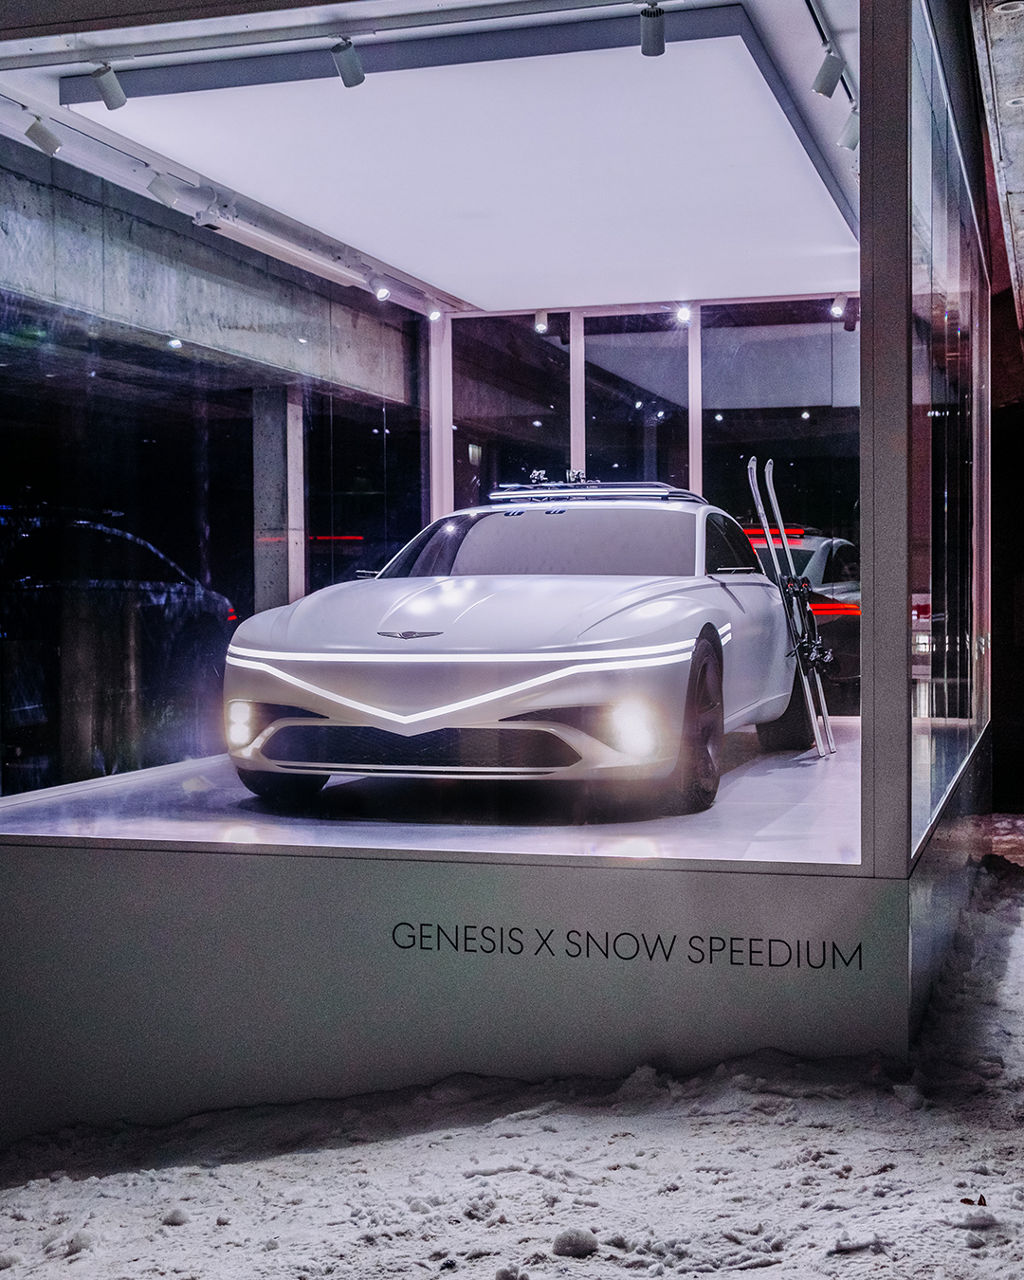 Glass showroom with the Genesis X Snow Speedium surrounded by snow